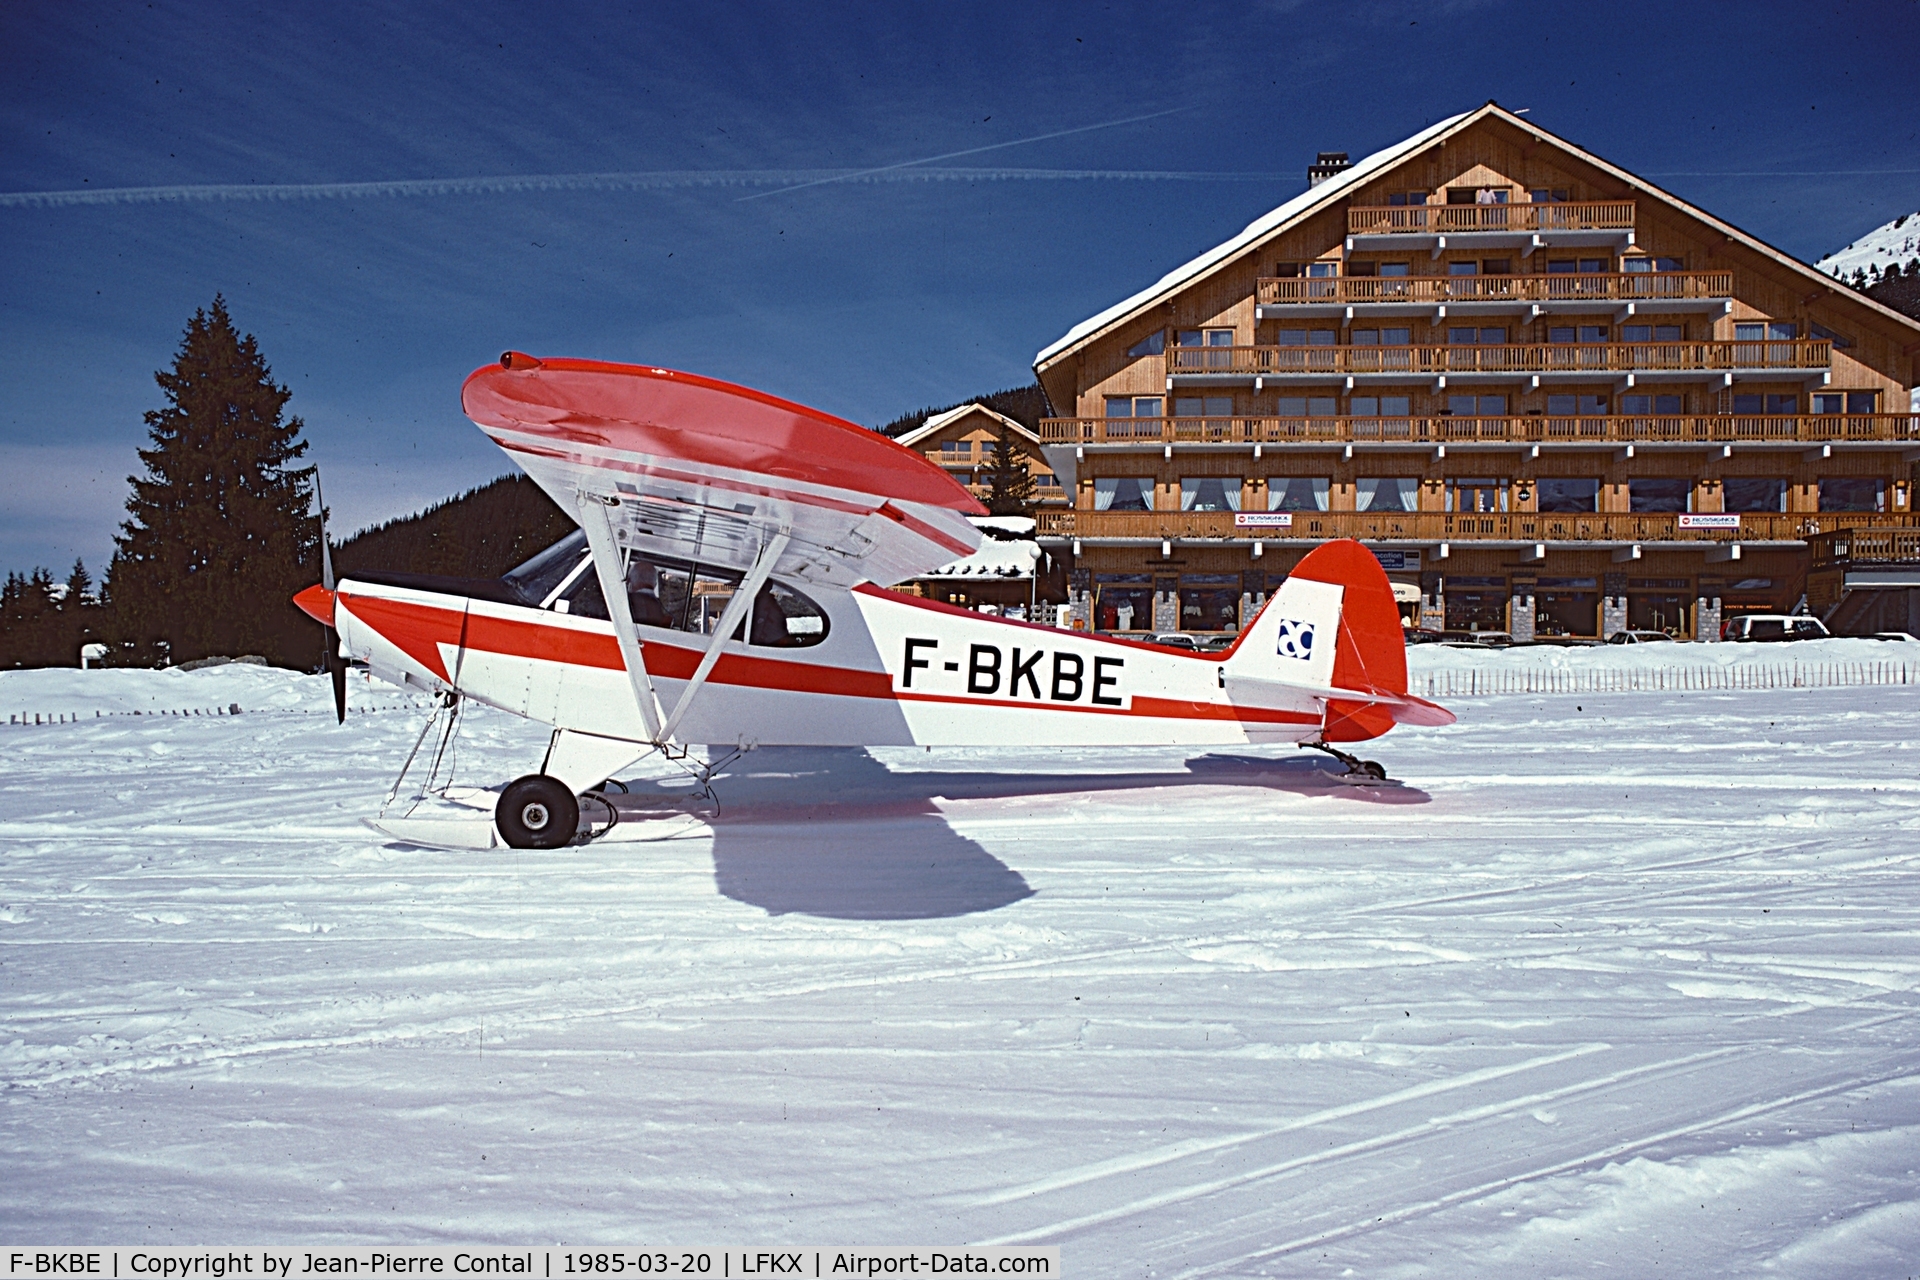 F-BKBE, Piper PA-18-150 Super Cub C/N 187658, On the apron at Méribel, Savoie, France. Scanned Kodachrome25 slide.This plane then belonged to the 